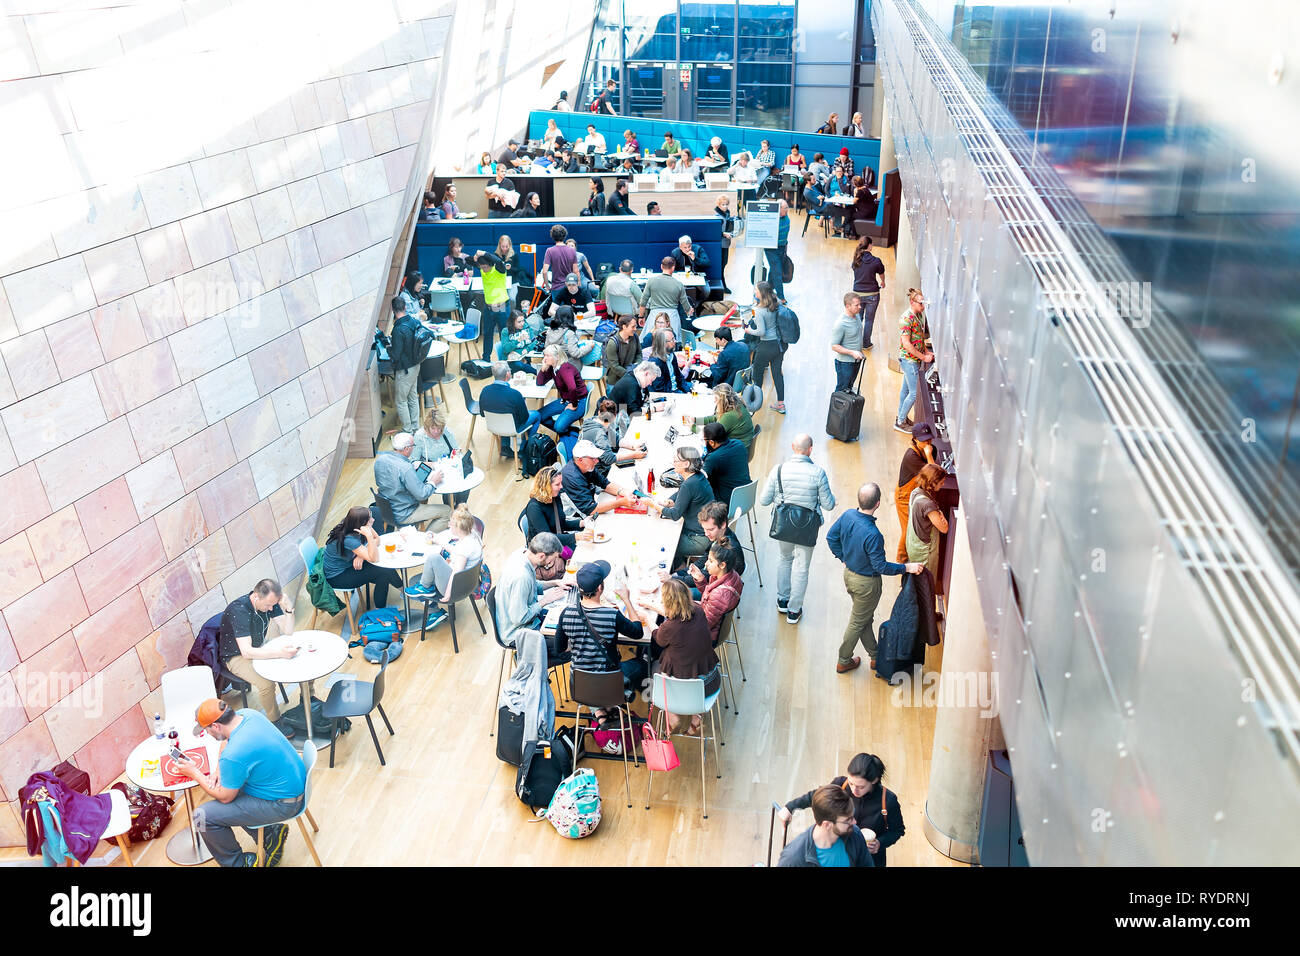 Keflavik, Iceland - June 20, 2018: Icelandair terminal cafe high angle view of people sitting at tables eating by restaurant in international airport  Stock Photo